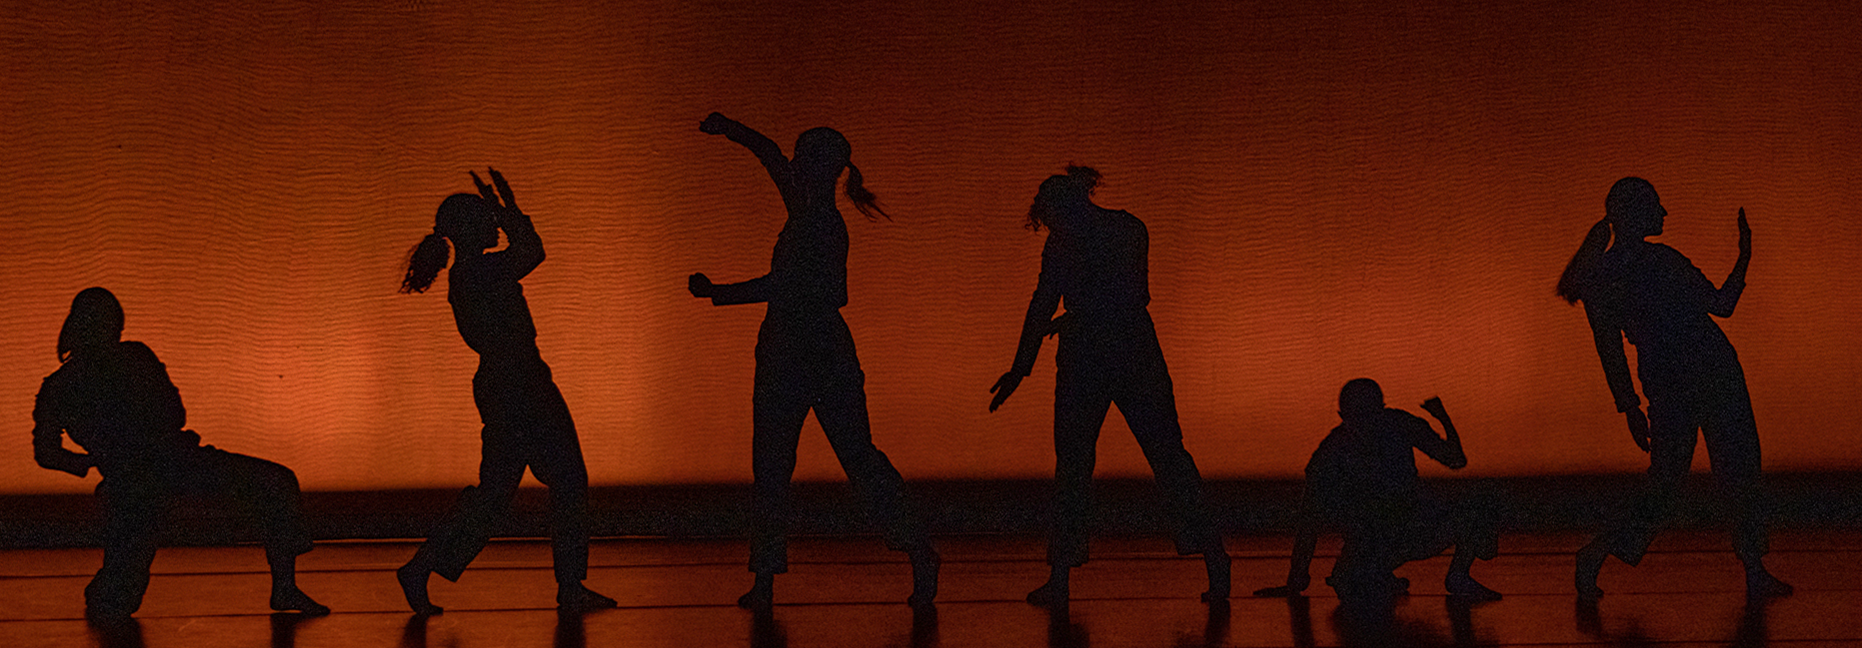 Silhouetted dancers on an orange background